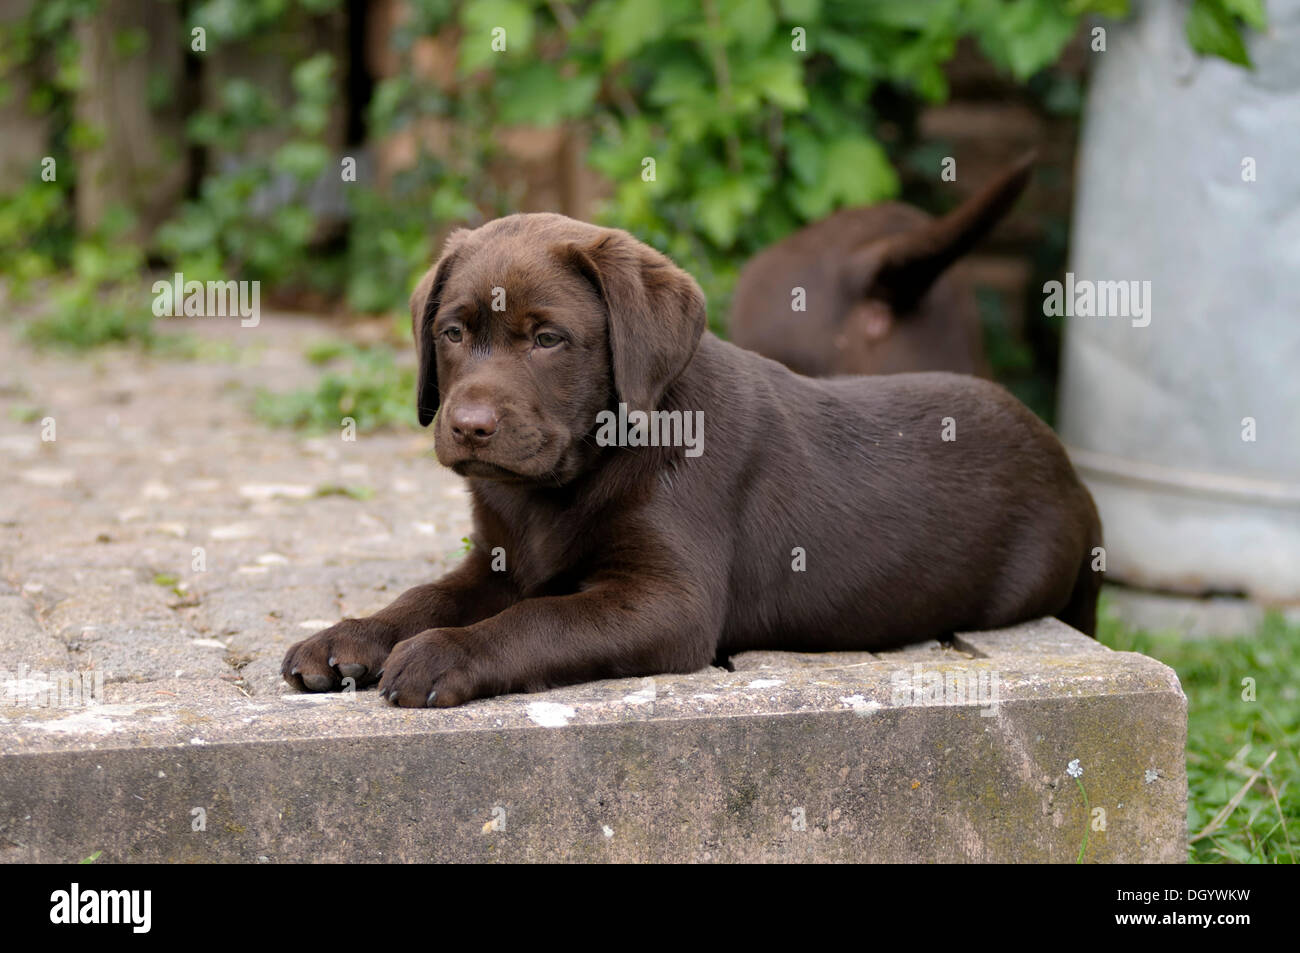 Brown Labrador Retriever, puppy lying on a paved terrace Stock Photo